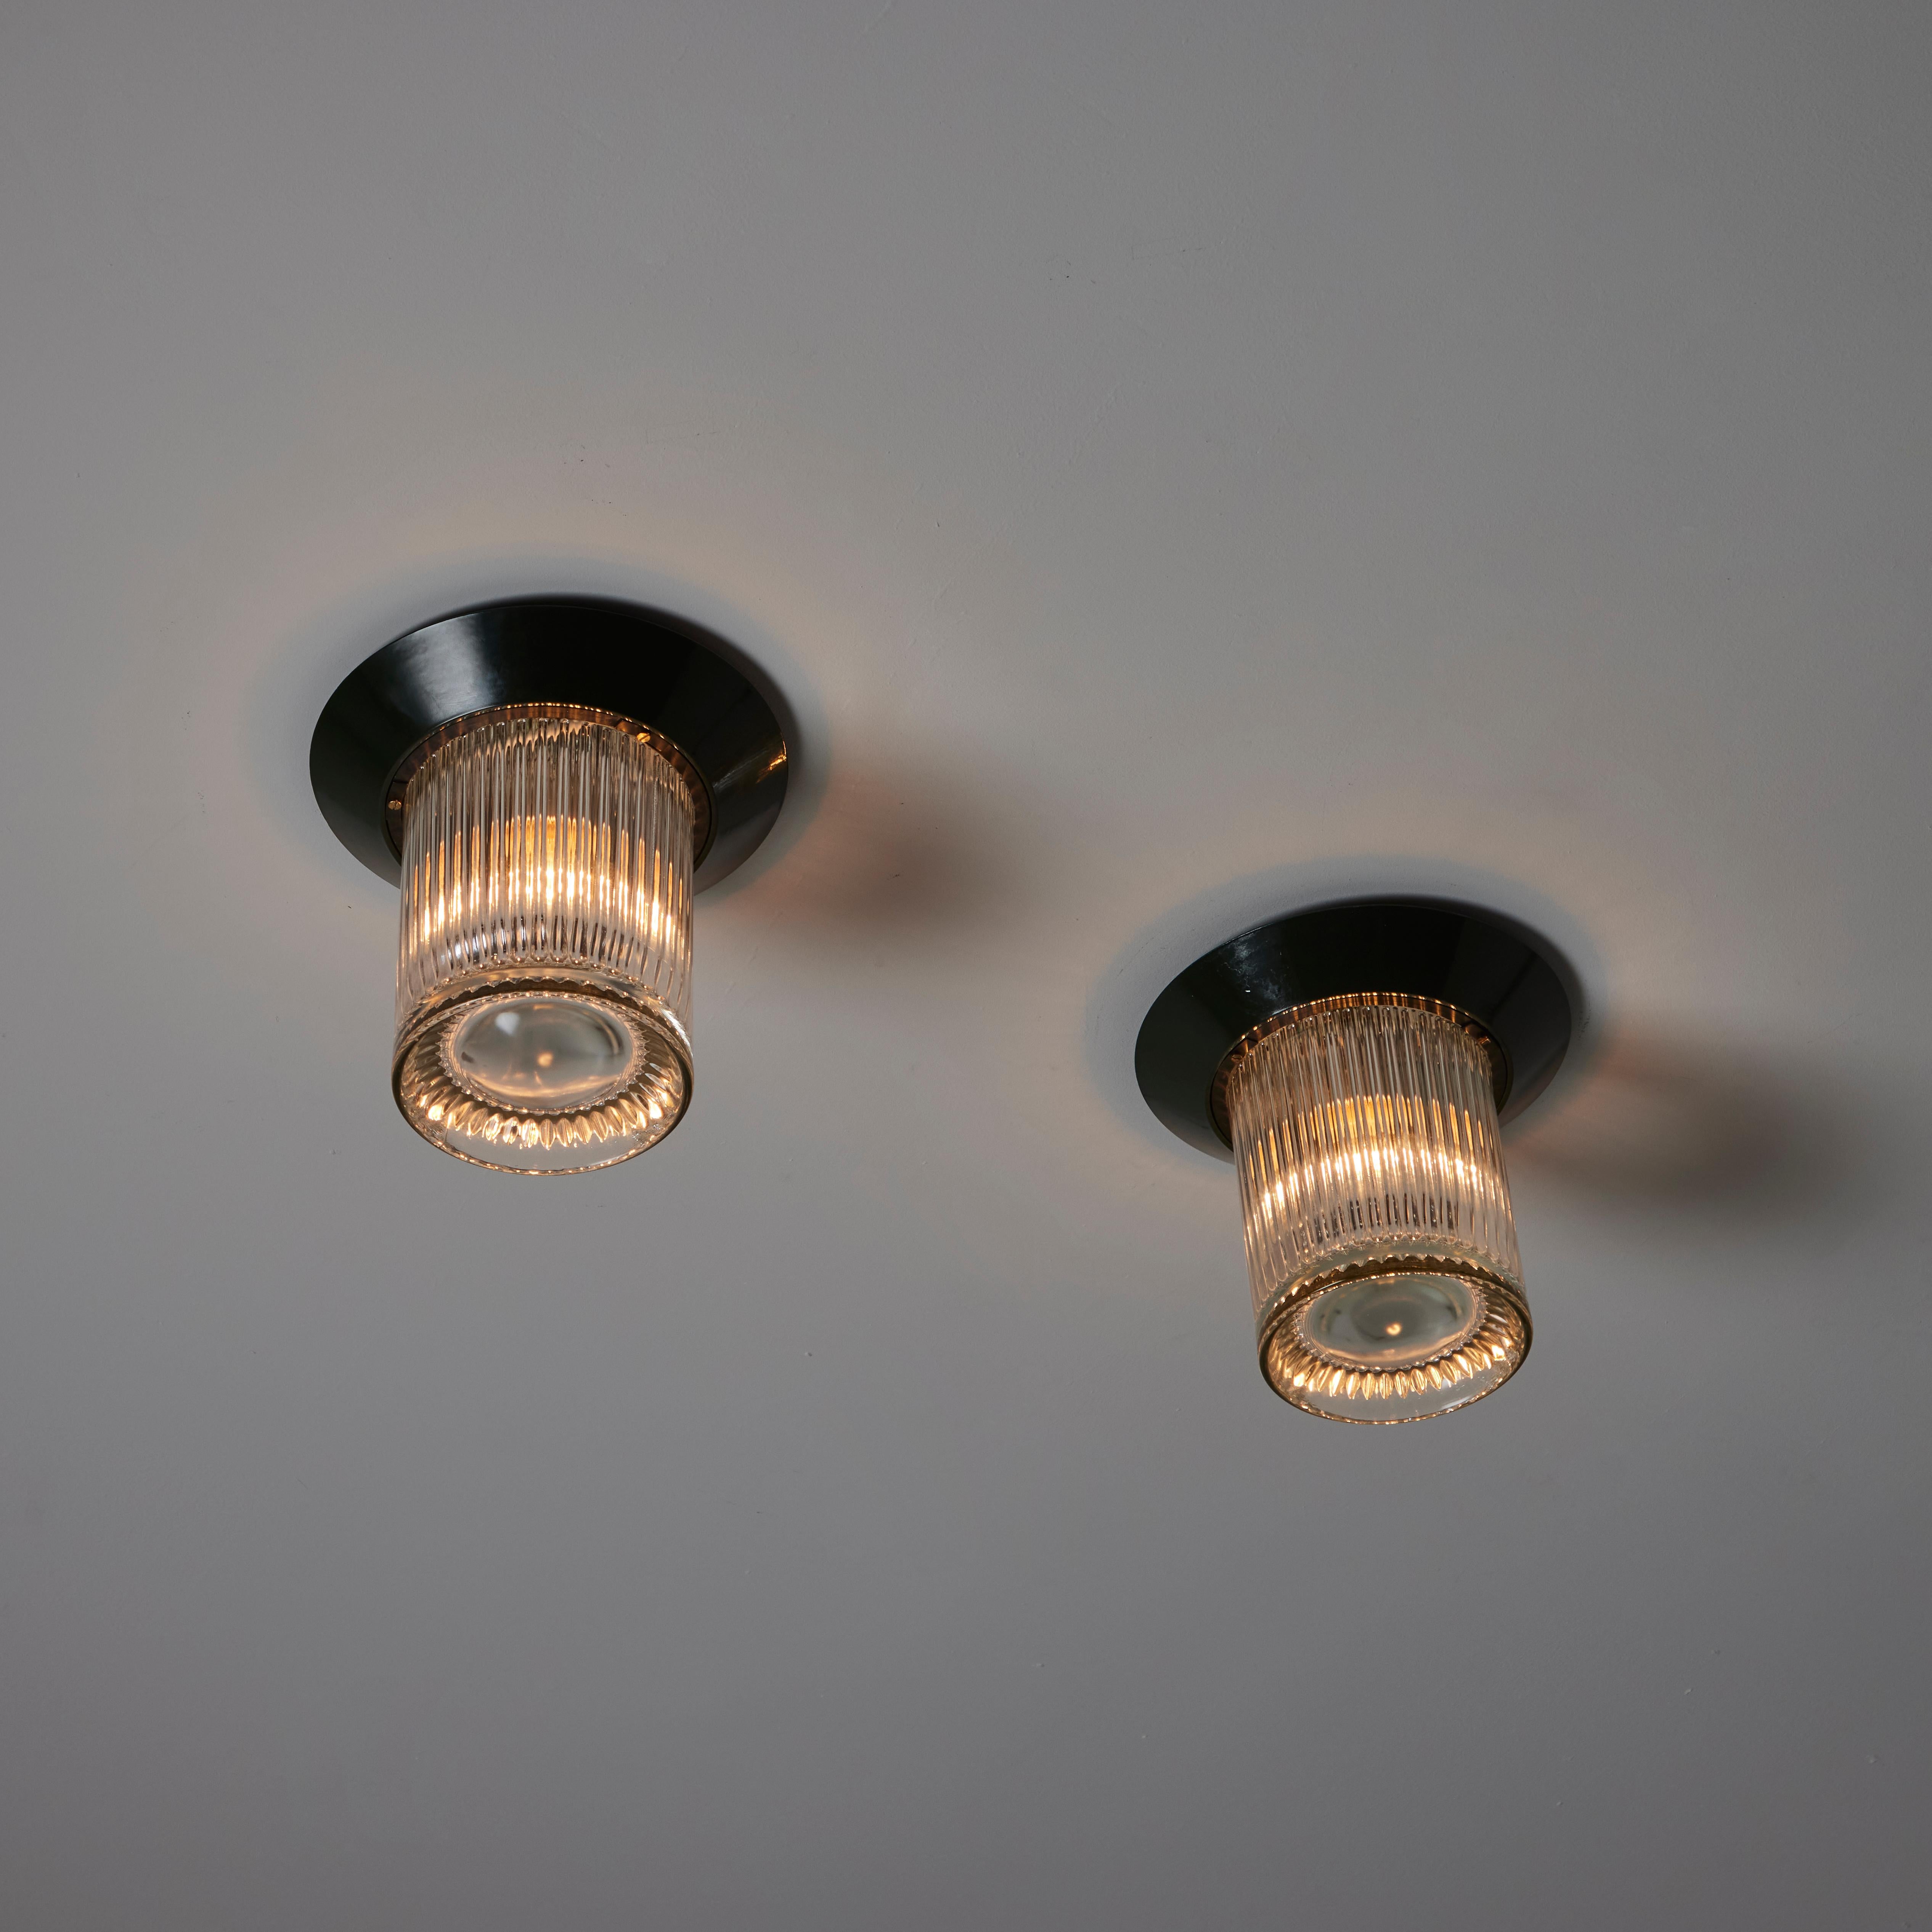 'Cavea' Flushmounts by Angelo Mangiarotti for Artemide. Designed and manufactured in Italy, circa the 1970s. Cylindrical reeded glass paired with enameled forest green mounting plates. Each light holds a single E27 socket-type, adapted for the US.